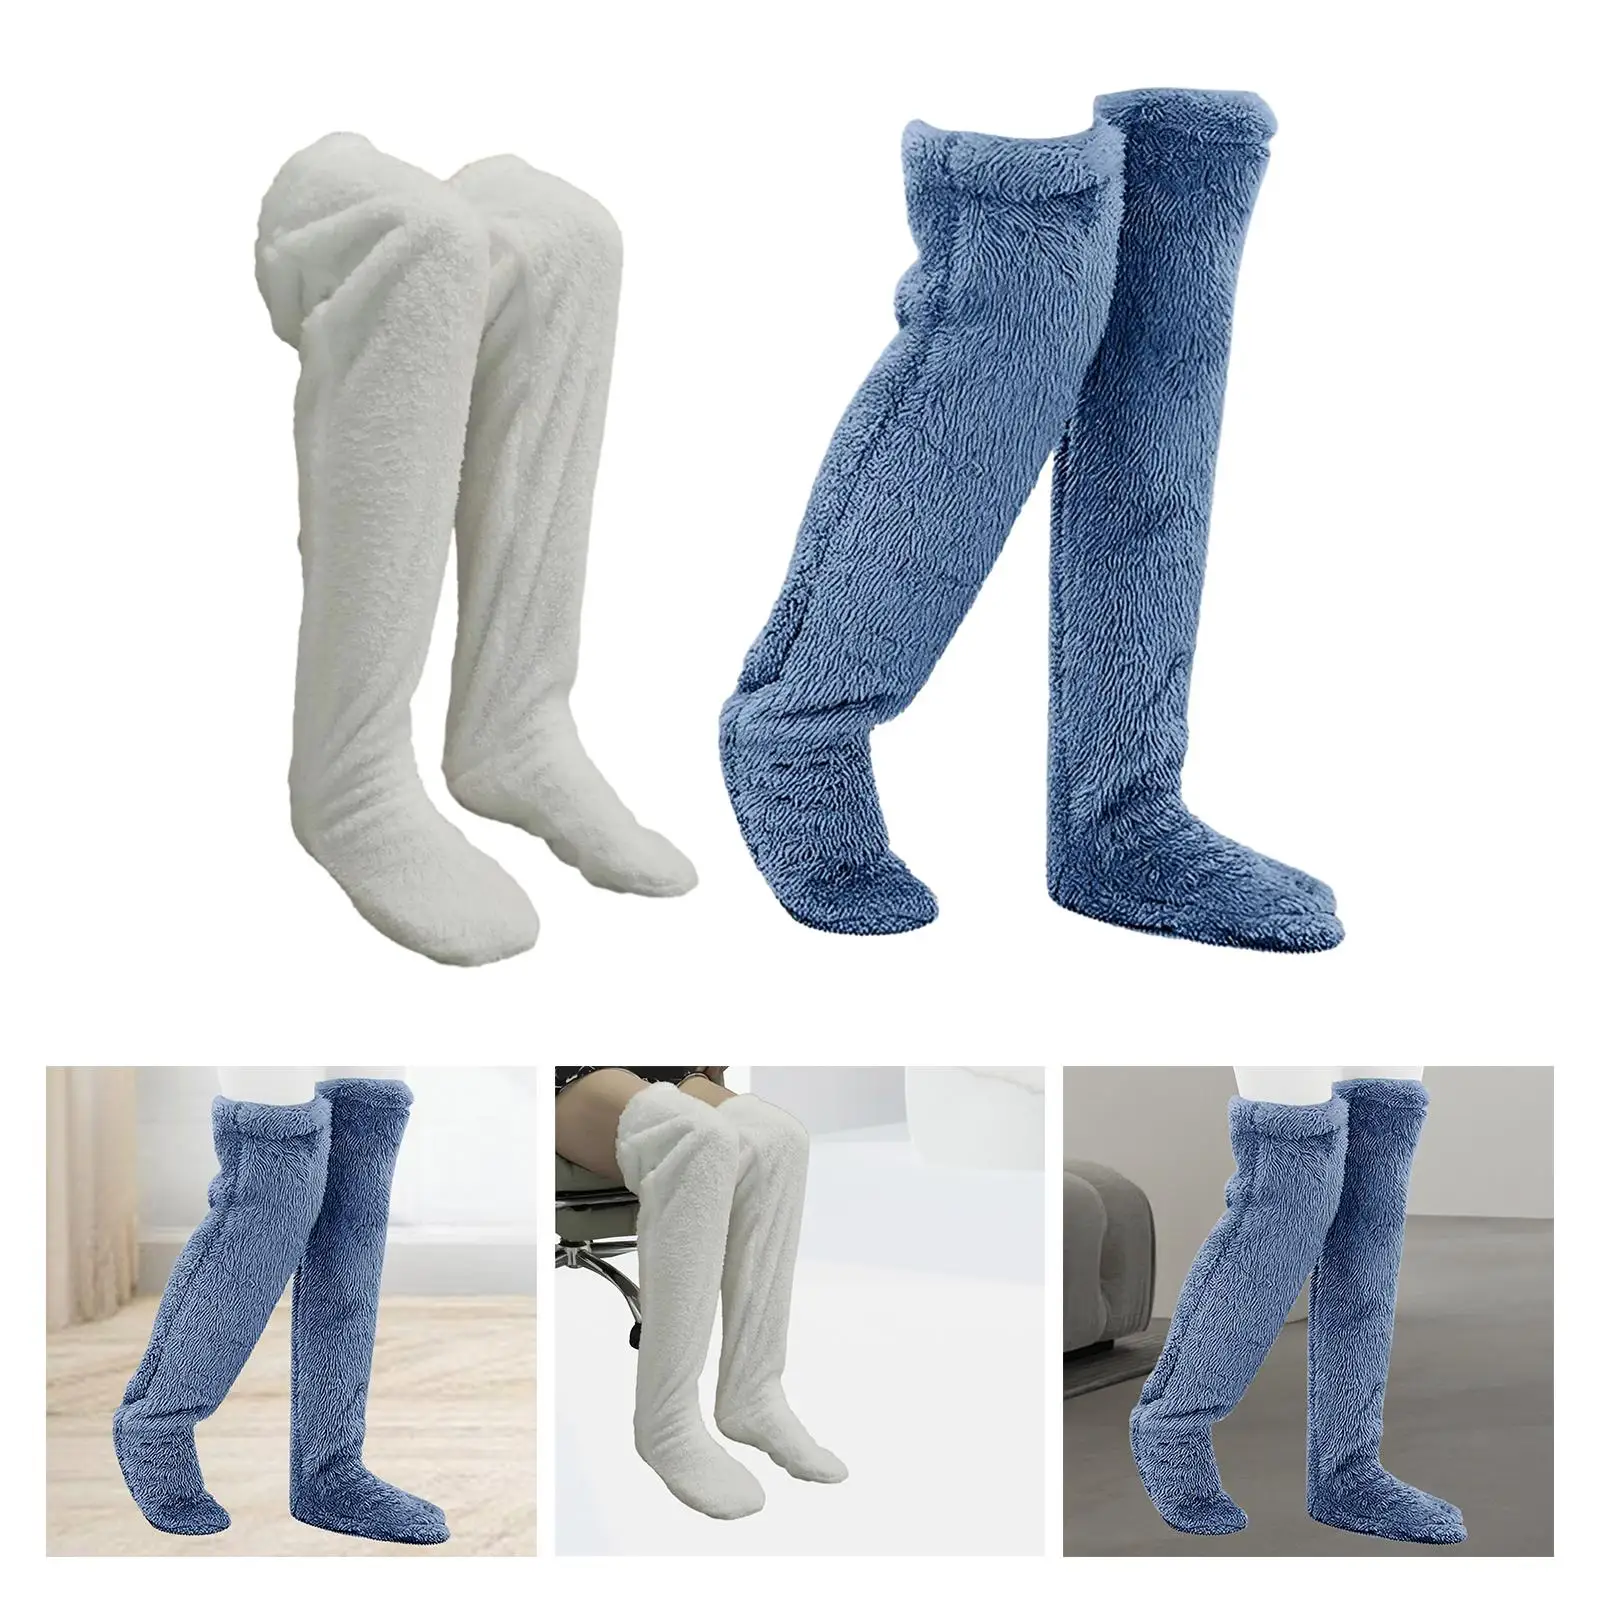 Womens Leg Warmers Fuzzy Leg Warmers Winter Boot Cuffs Cover Boot Toppers High Heels Boots Warm Stockings